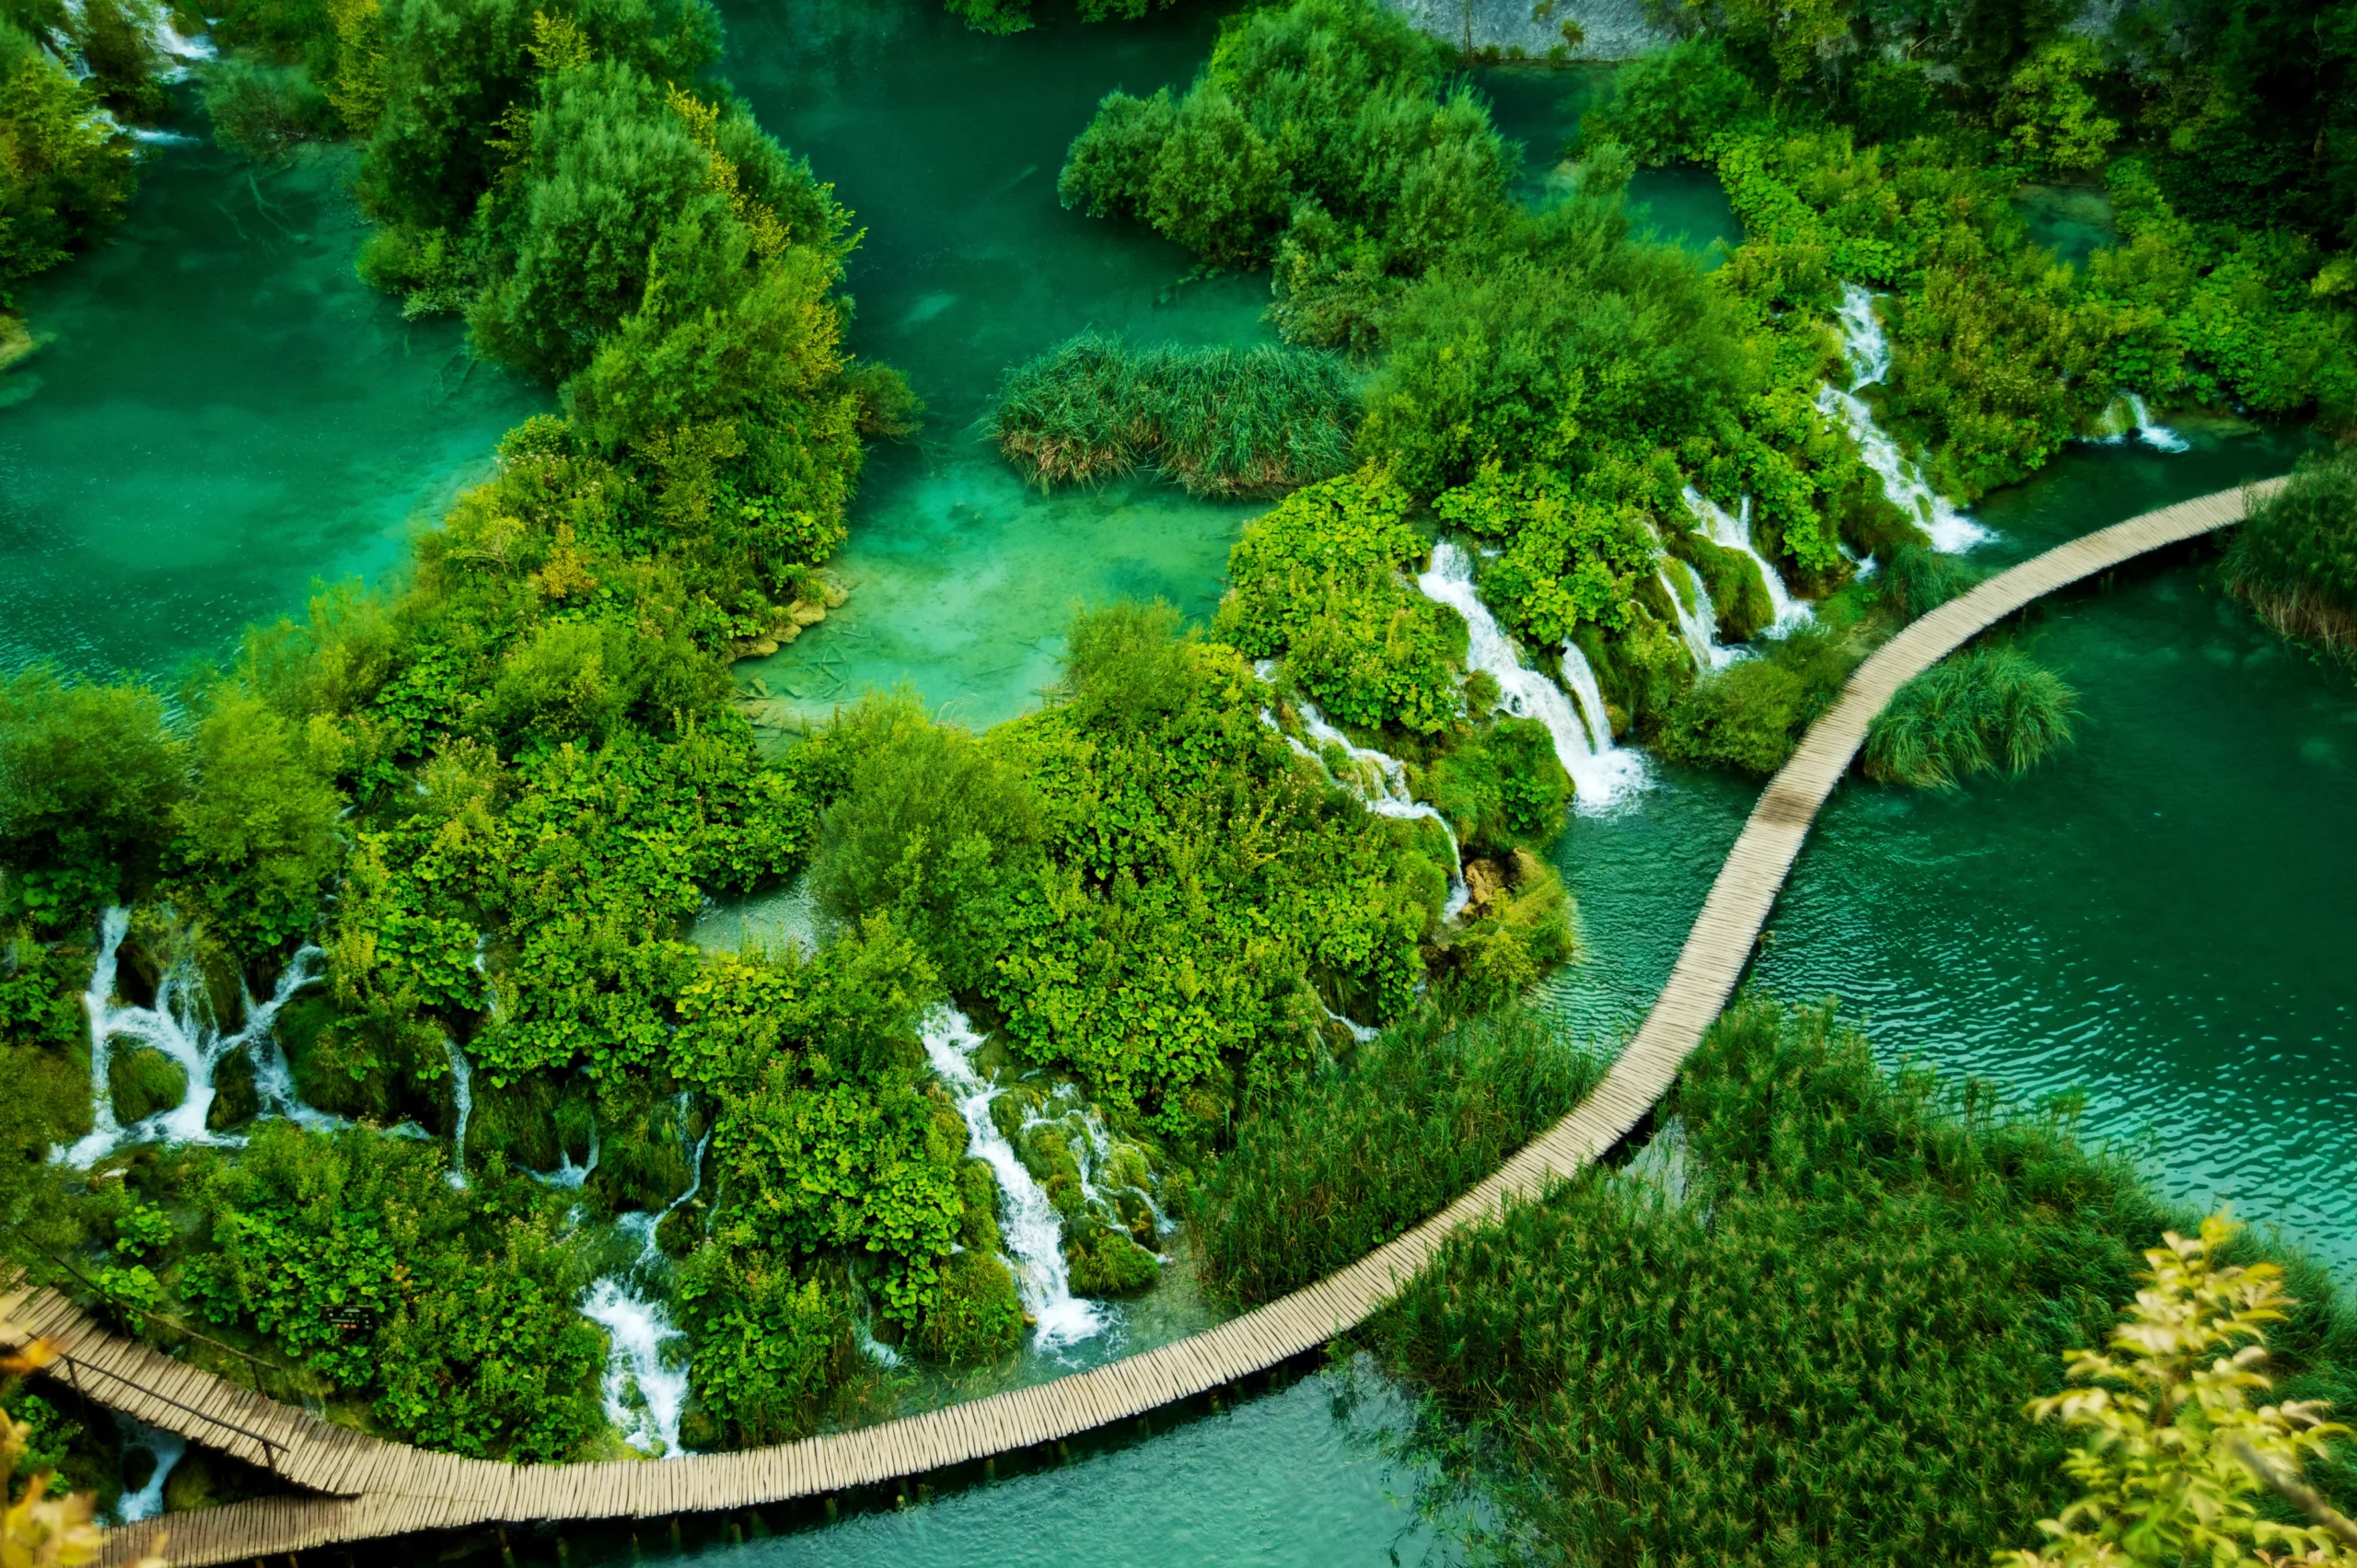 Walking path in Plitvice National Park